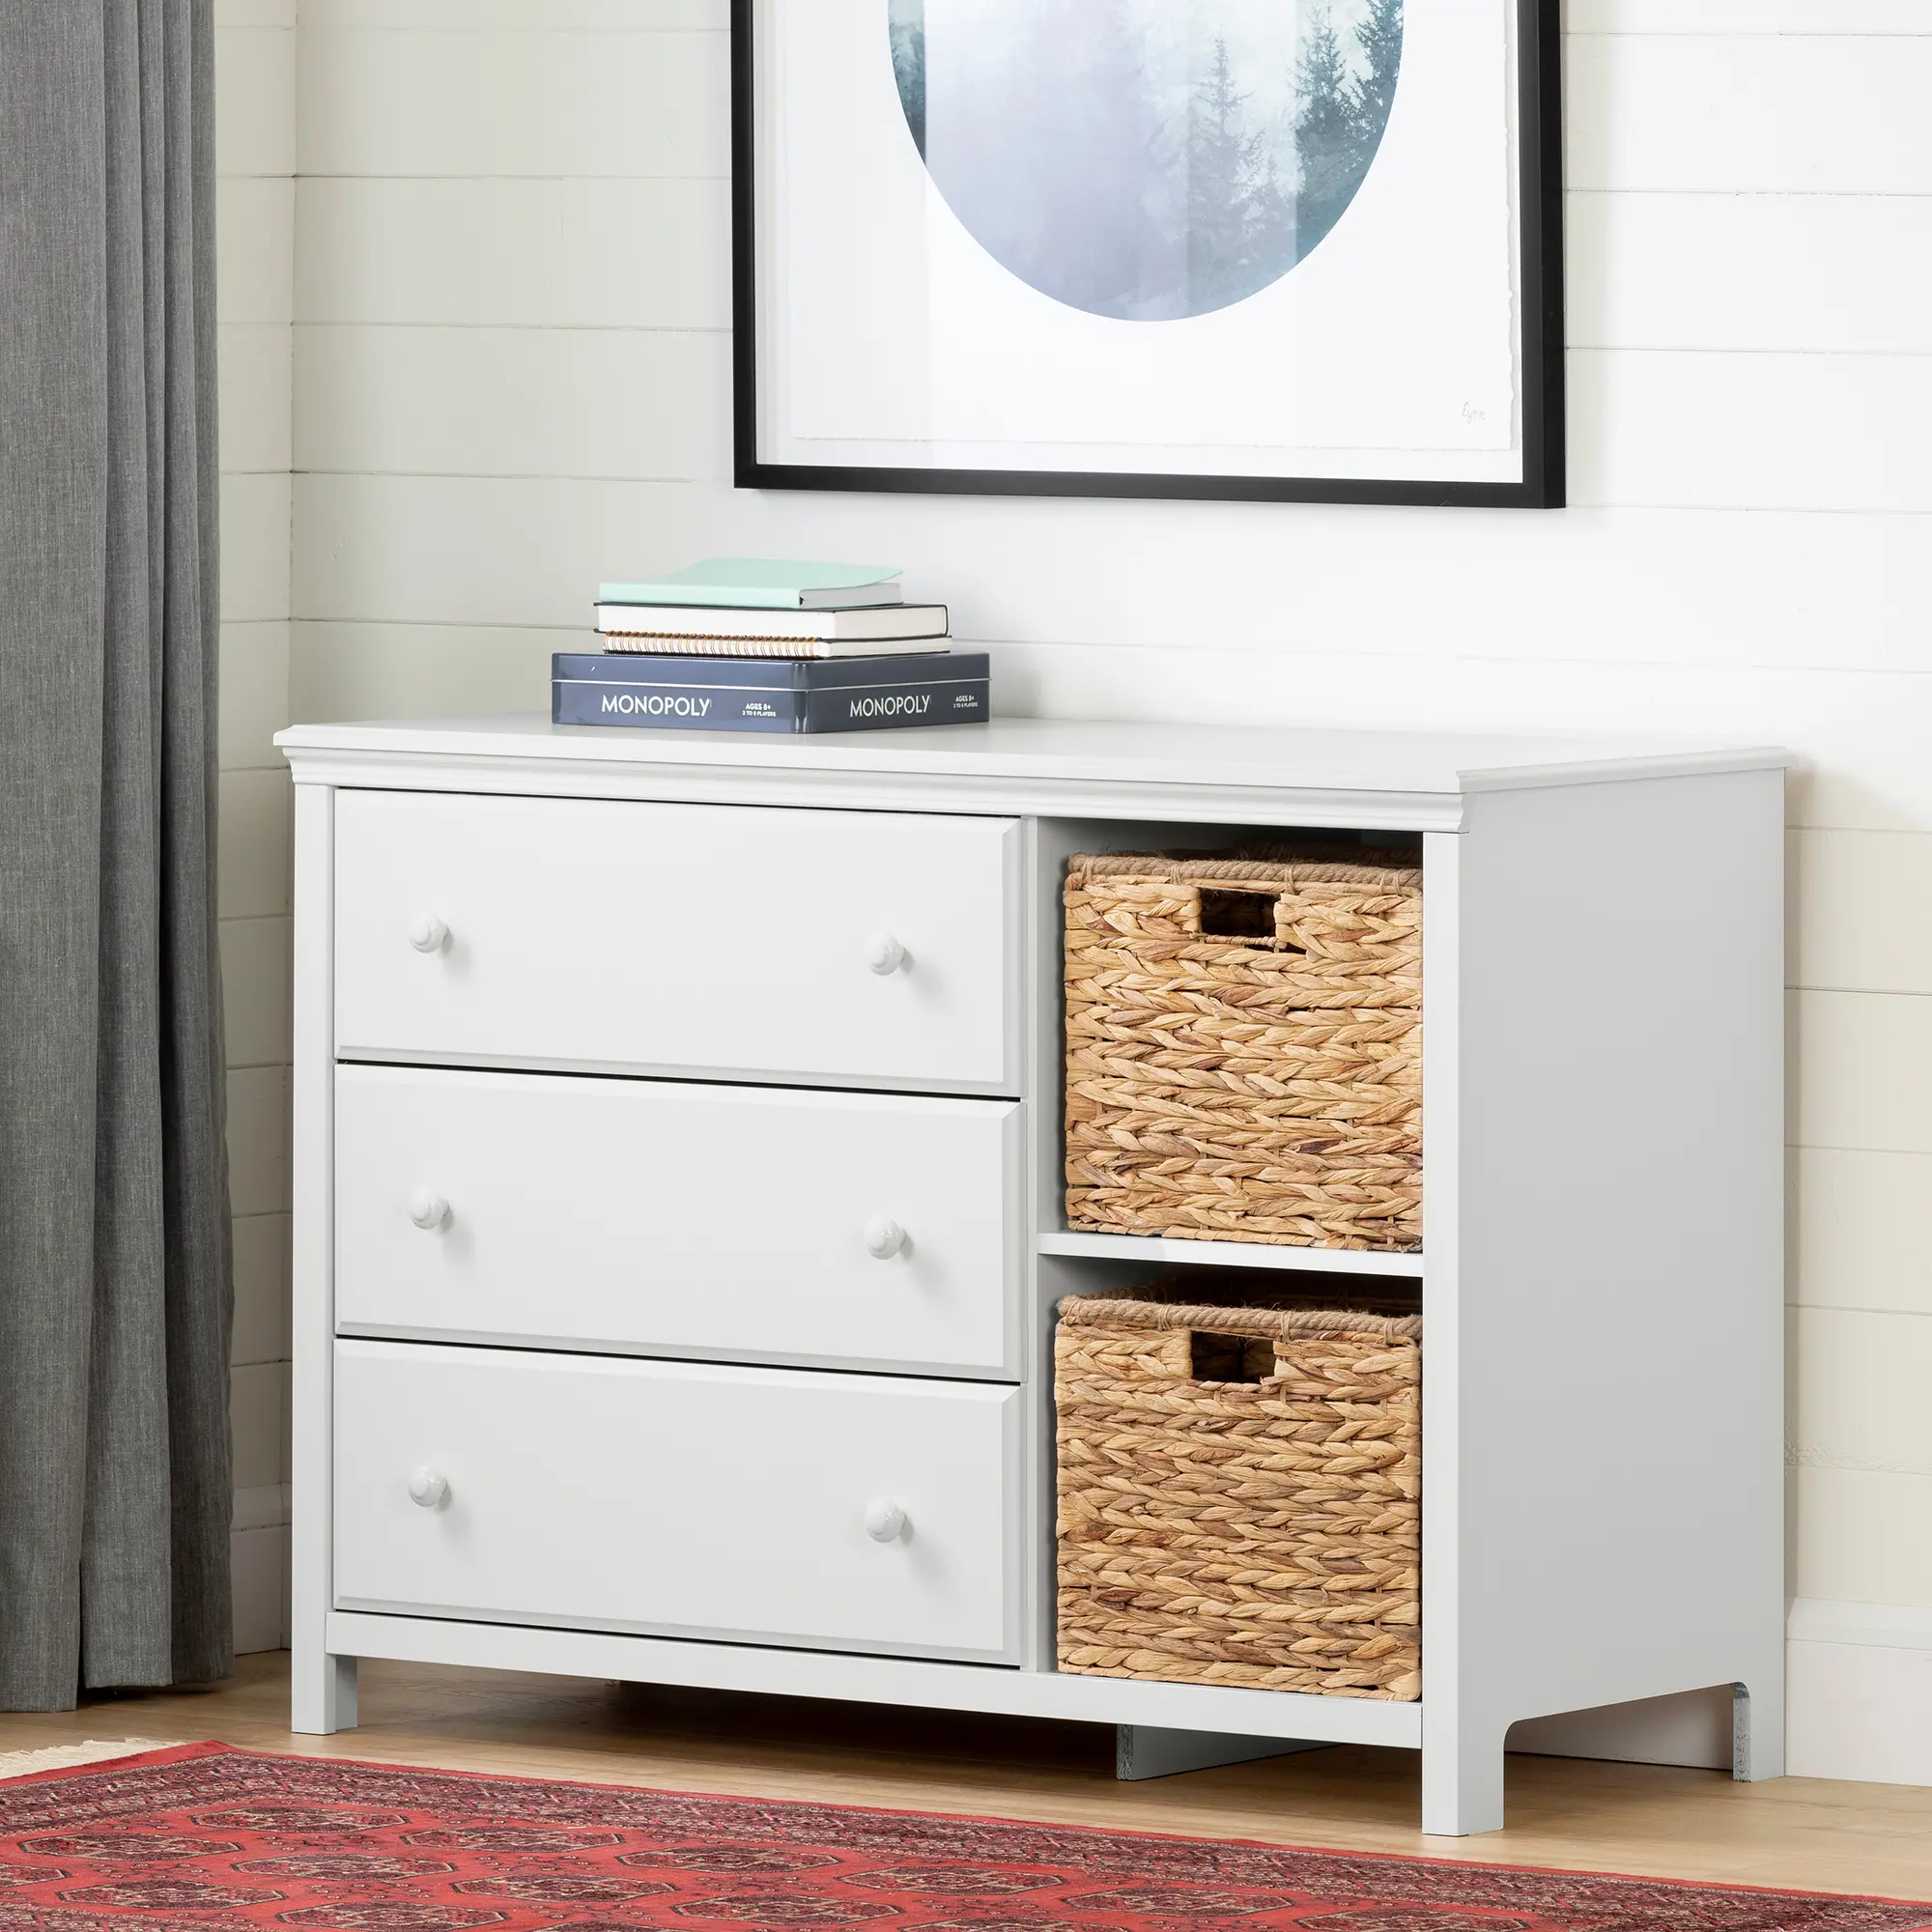 Cotton Candy White 3 Drawer Dresser with Baskets - South Shore